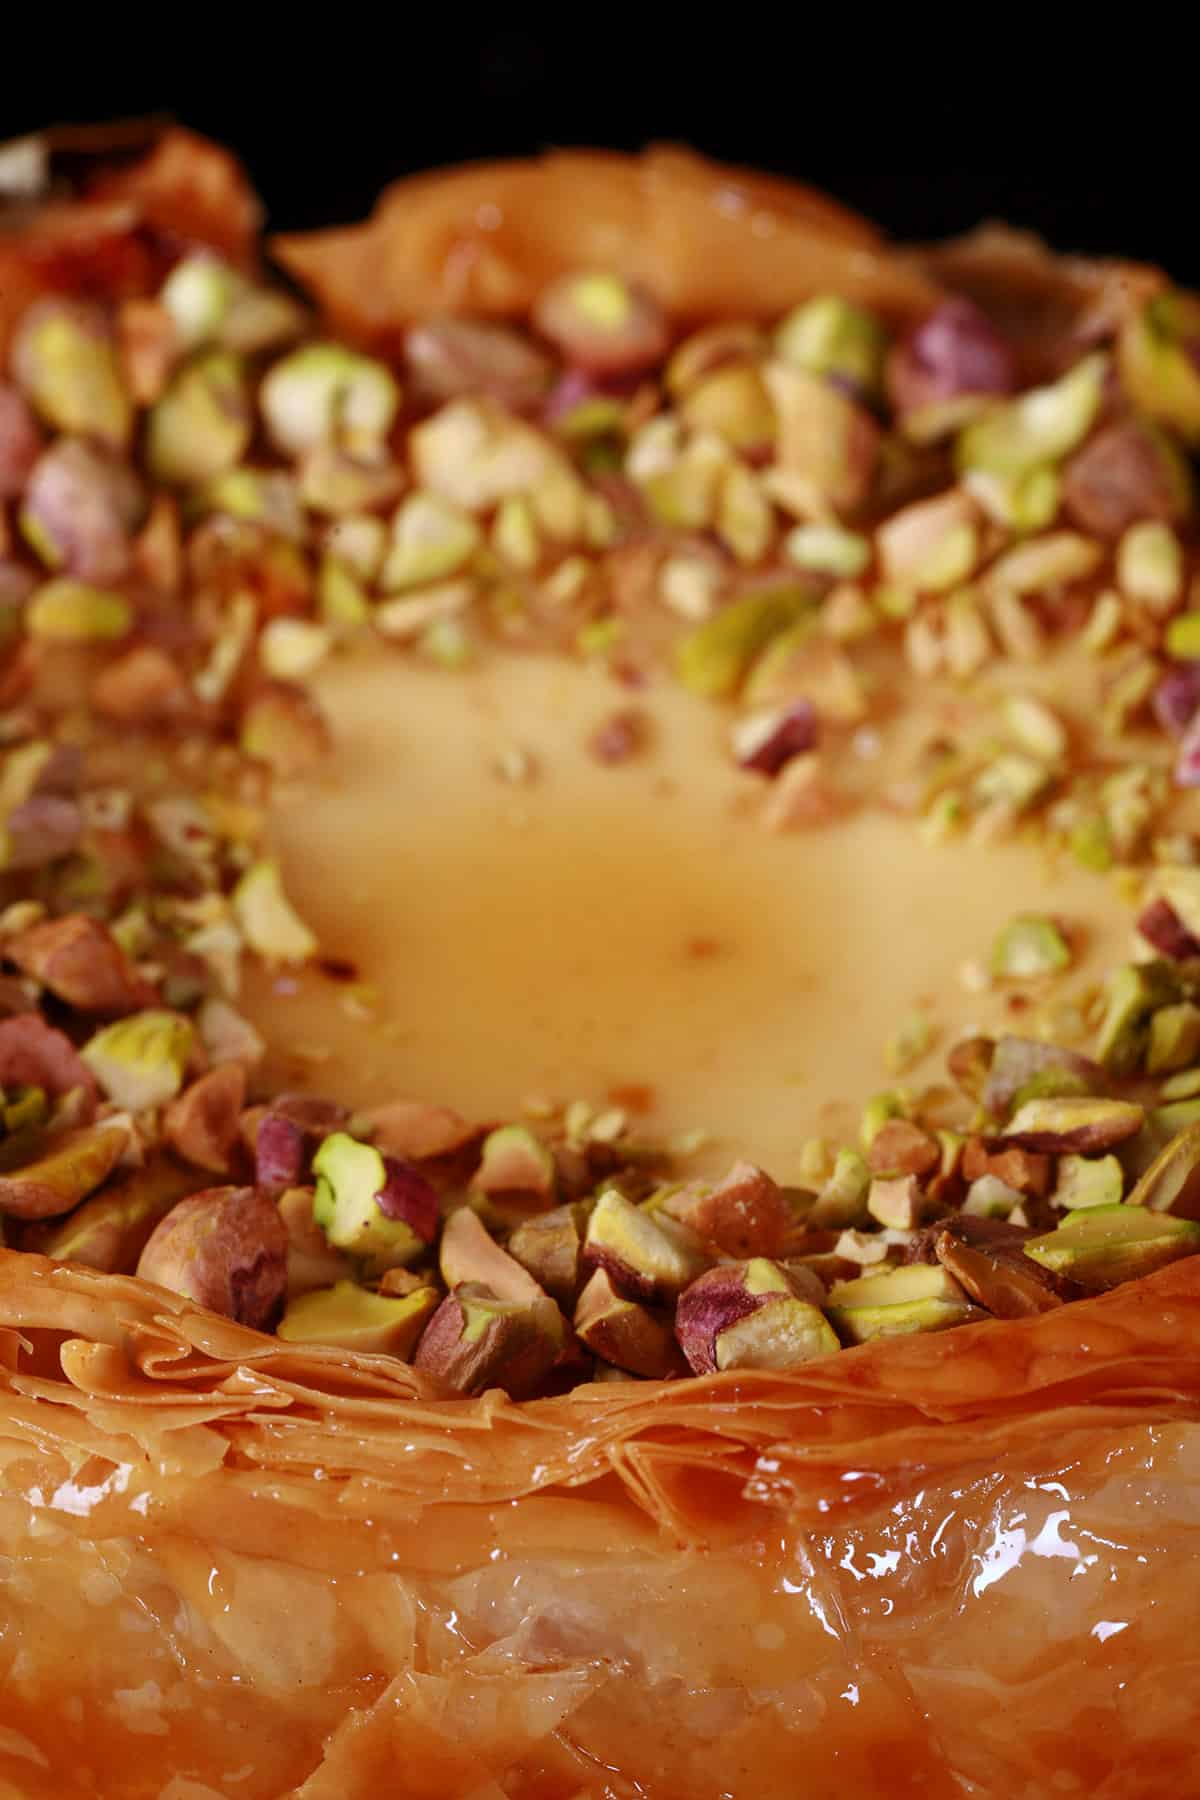 A close upview of the top of a mini cheesecake, covered in chopped pistachios.